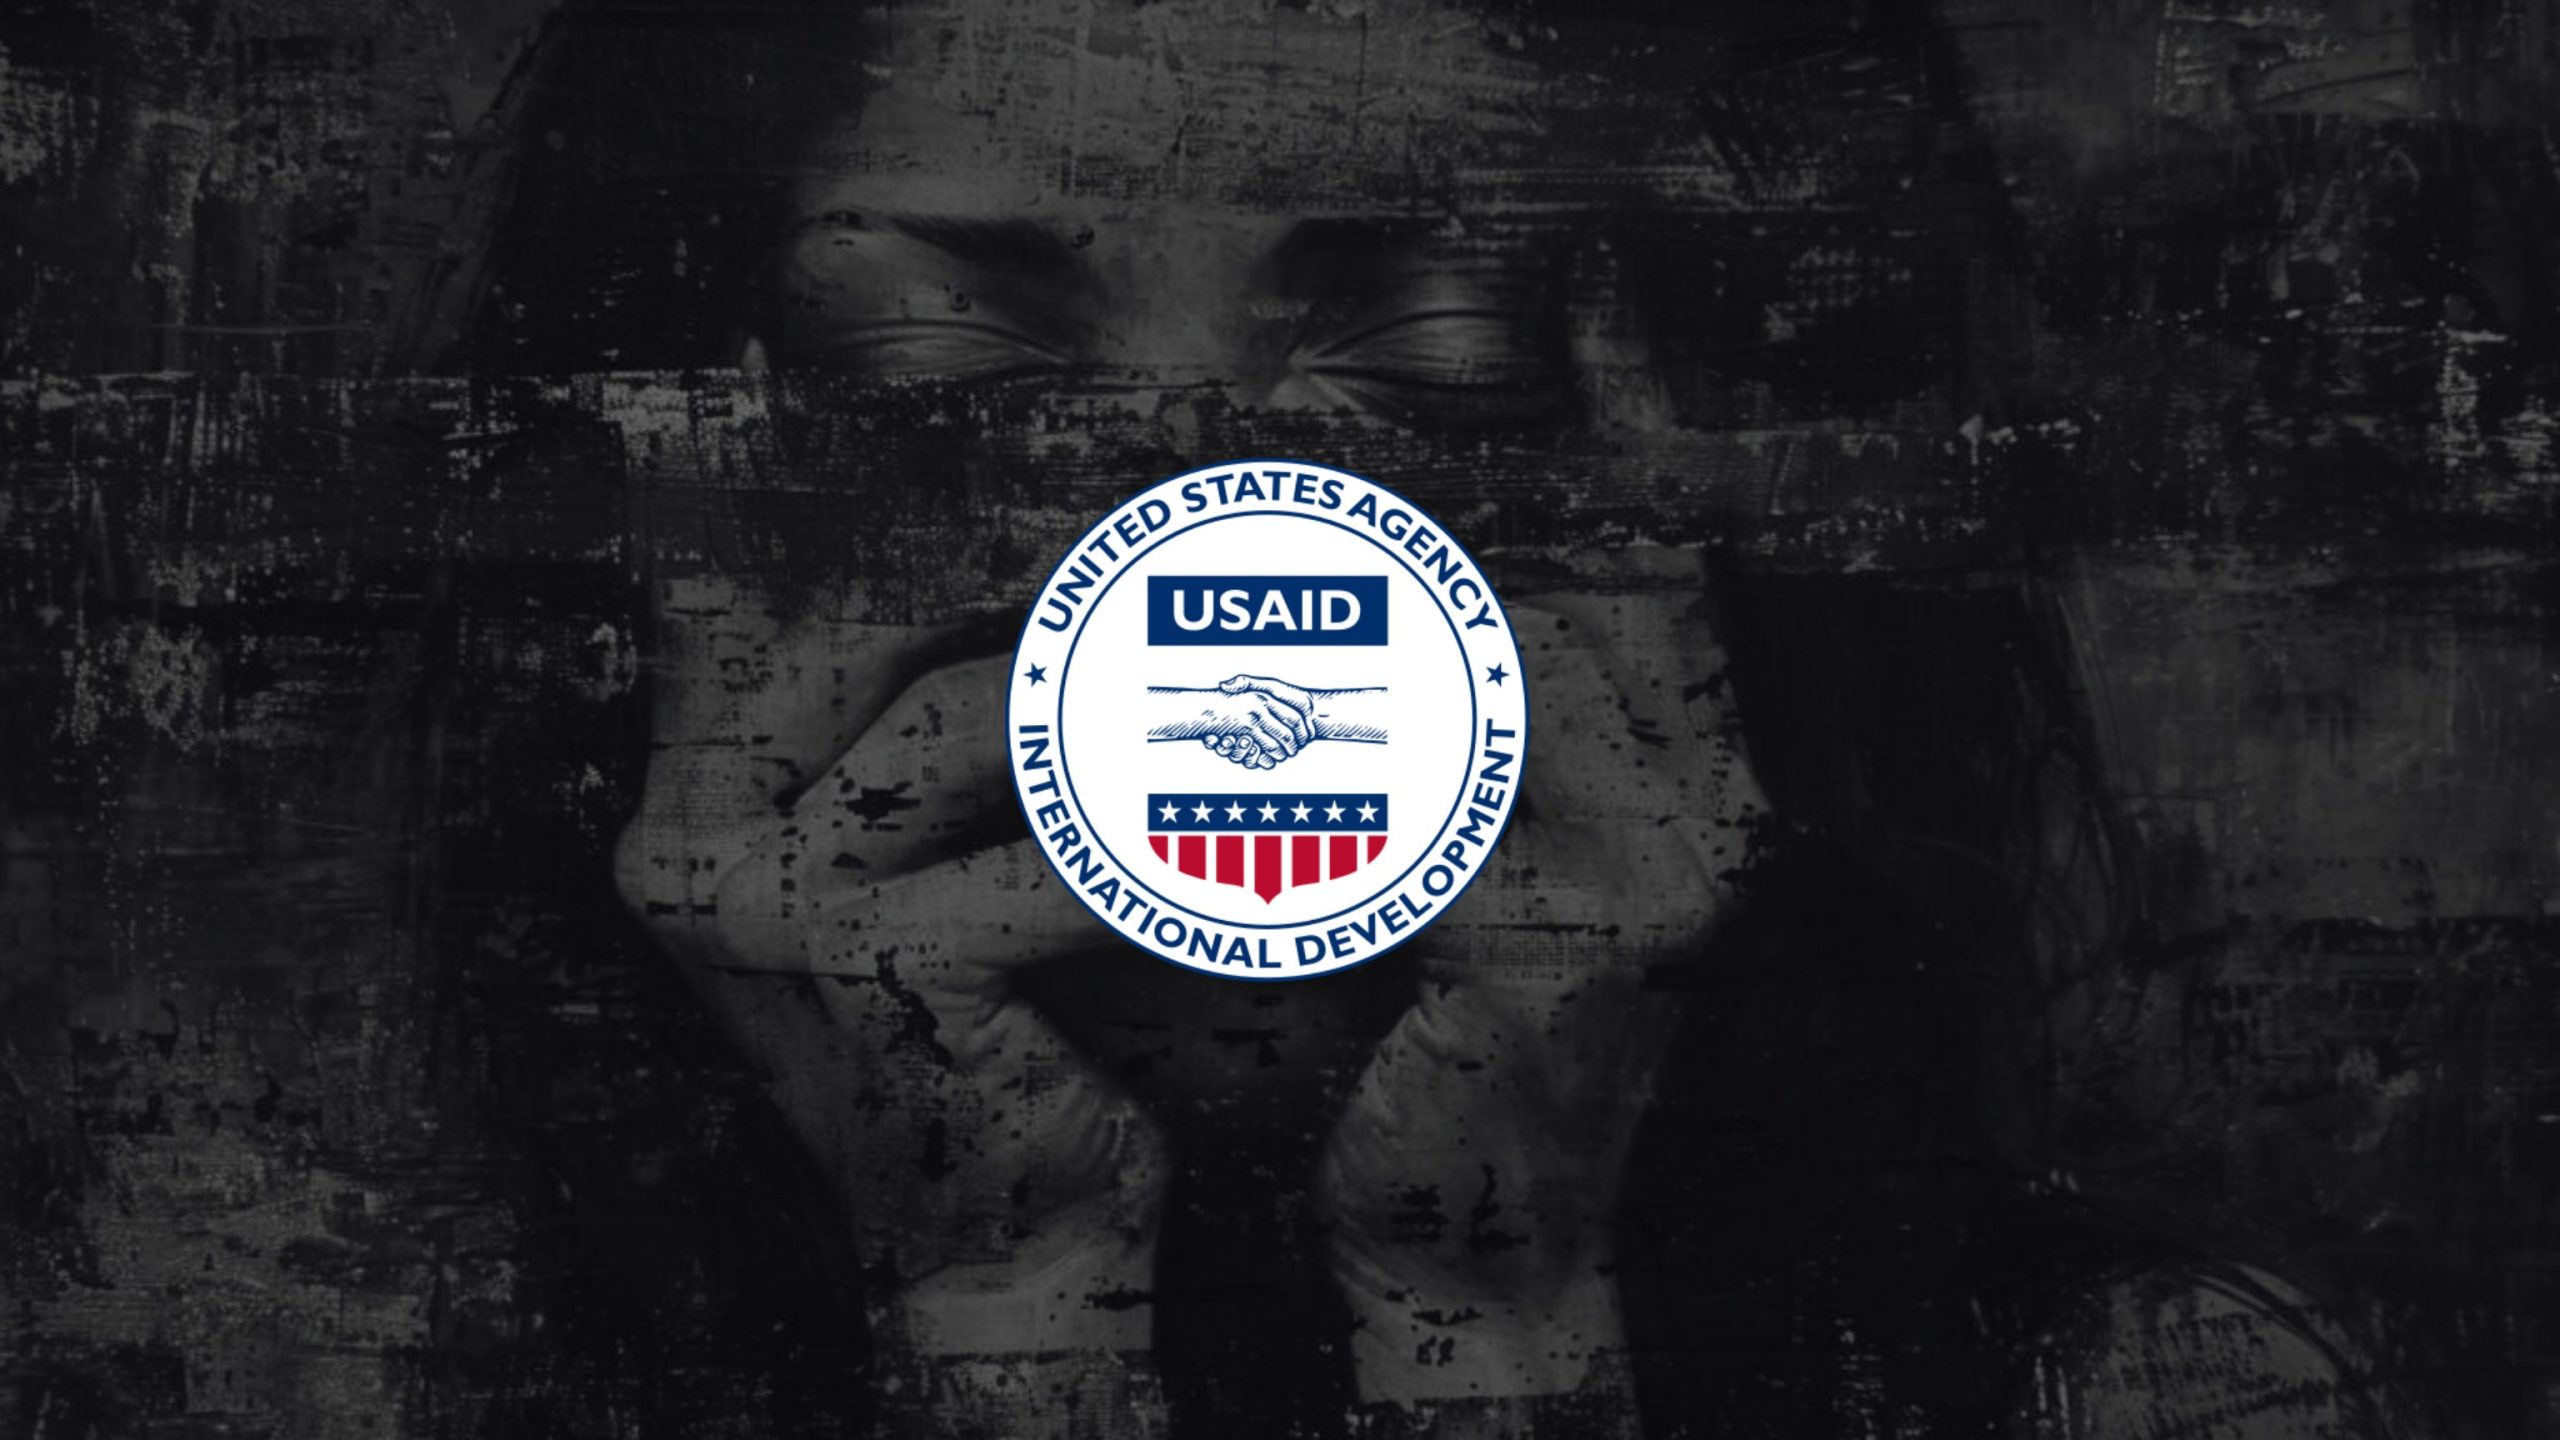 USAID’s “Disinformation Primer:” Documents Reveal Censorship Promotion Across Sectors